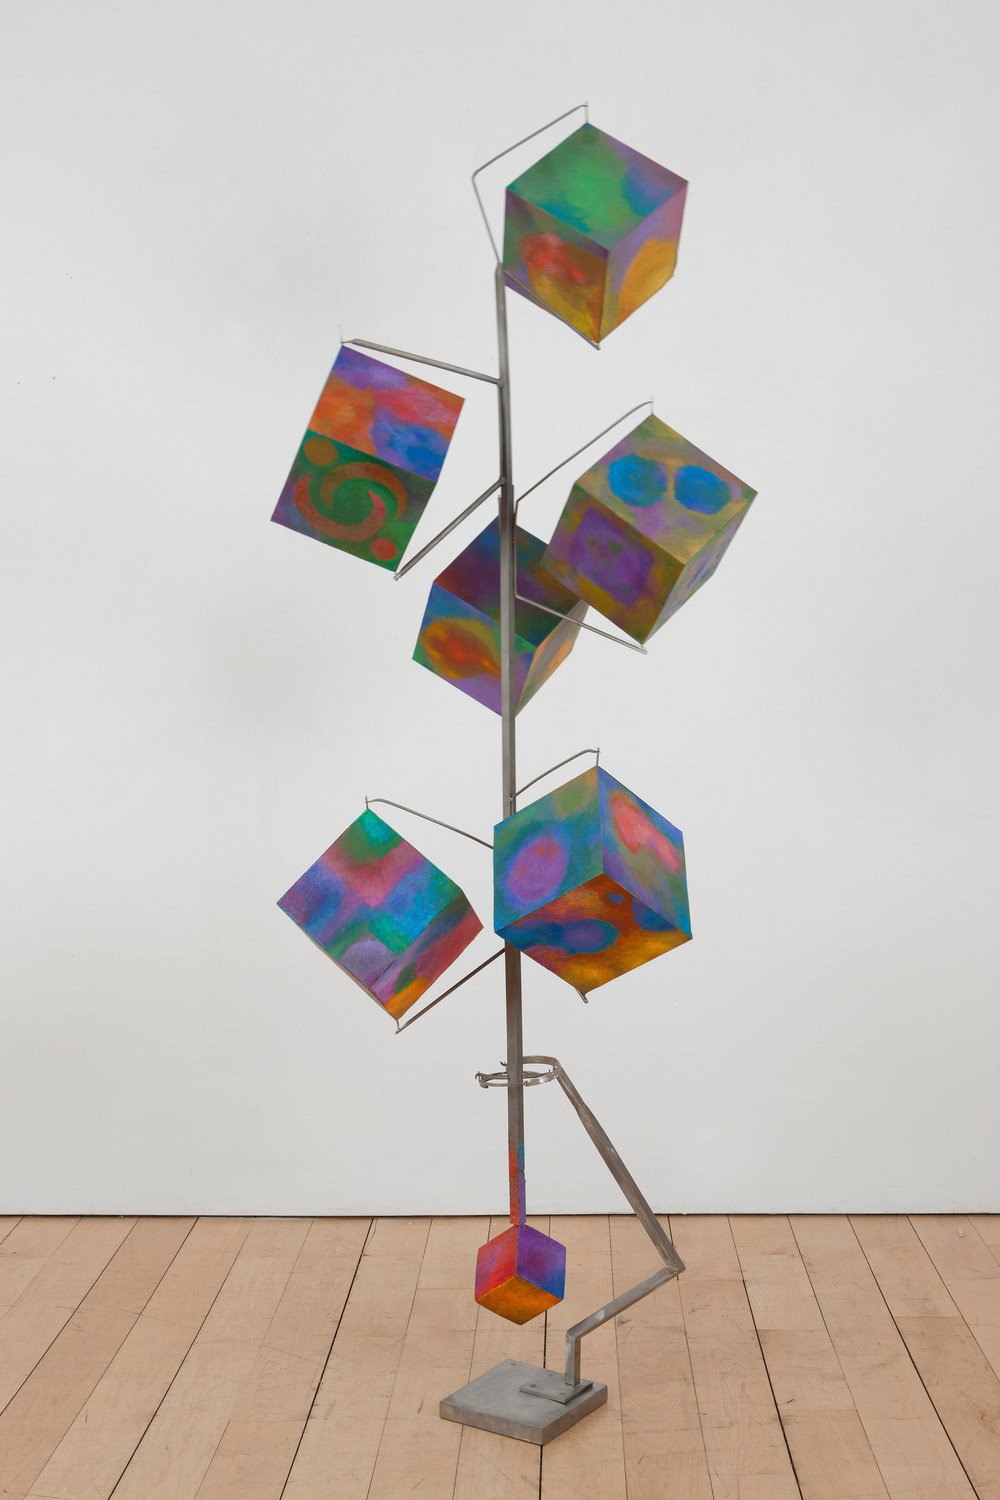 George rickey, column of six cubes with gimbal (view 1), 1995 96, stainless steel, polychrome, 83 x 32 x 32 in, photo by bill orcutt 